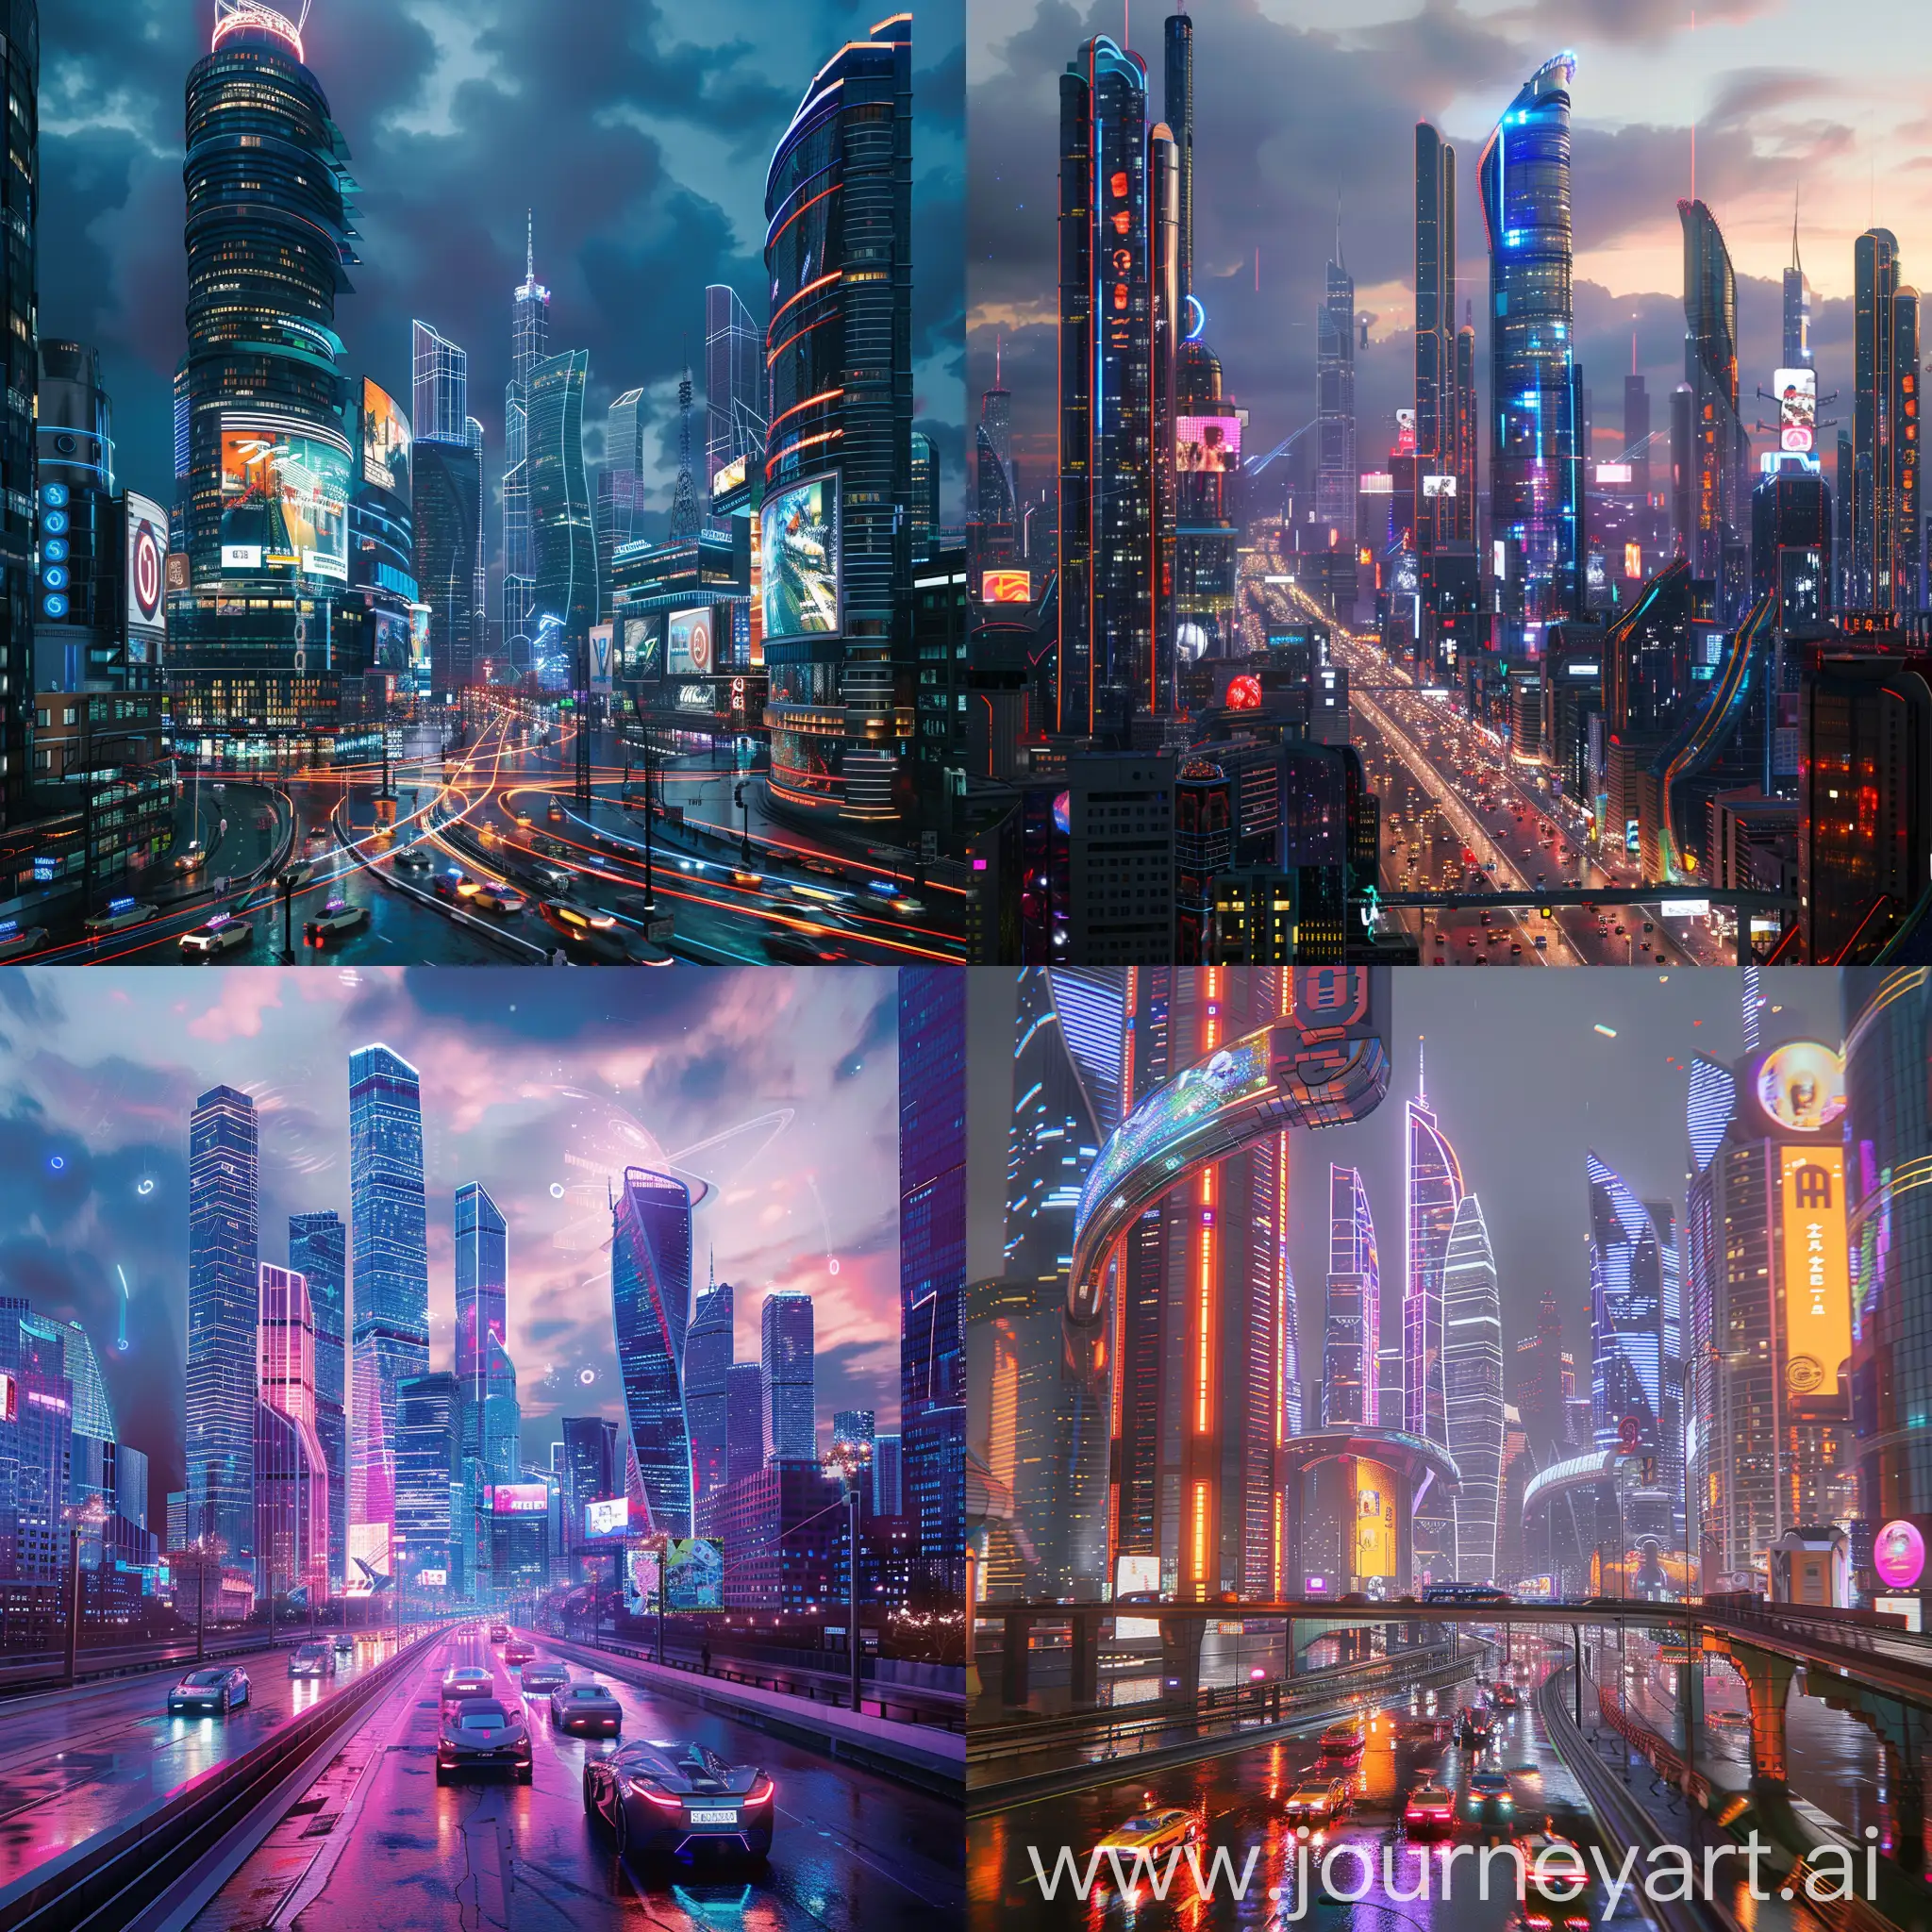 Futuristic-TechnoAdvanced-Moscow-with-Neon-Skyscrapers-and-Hovercars